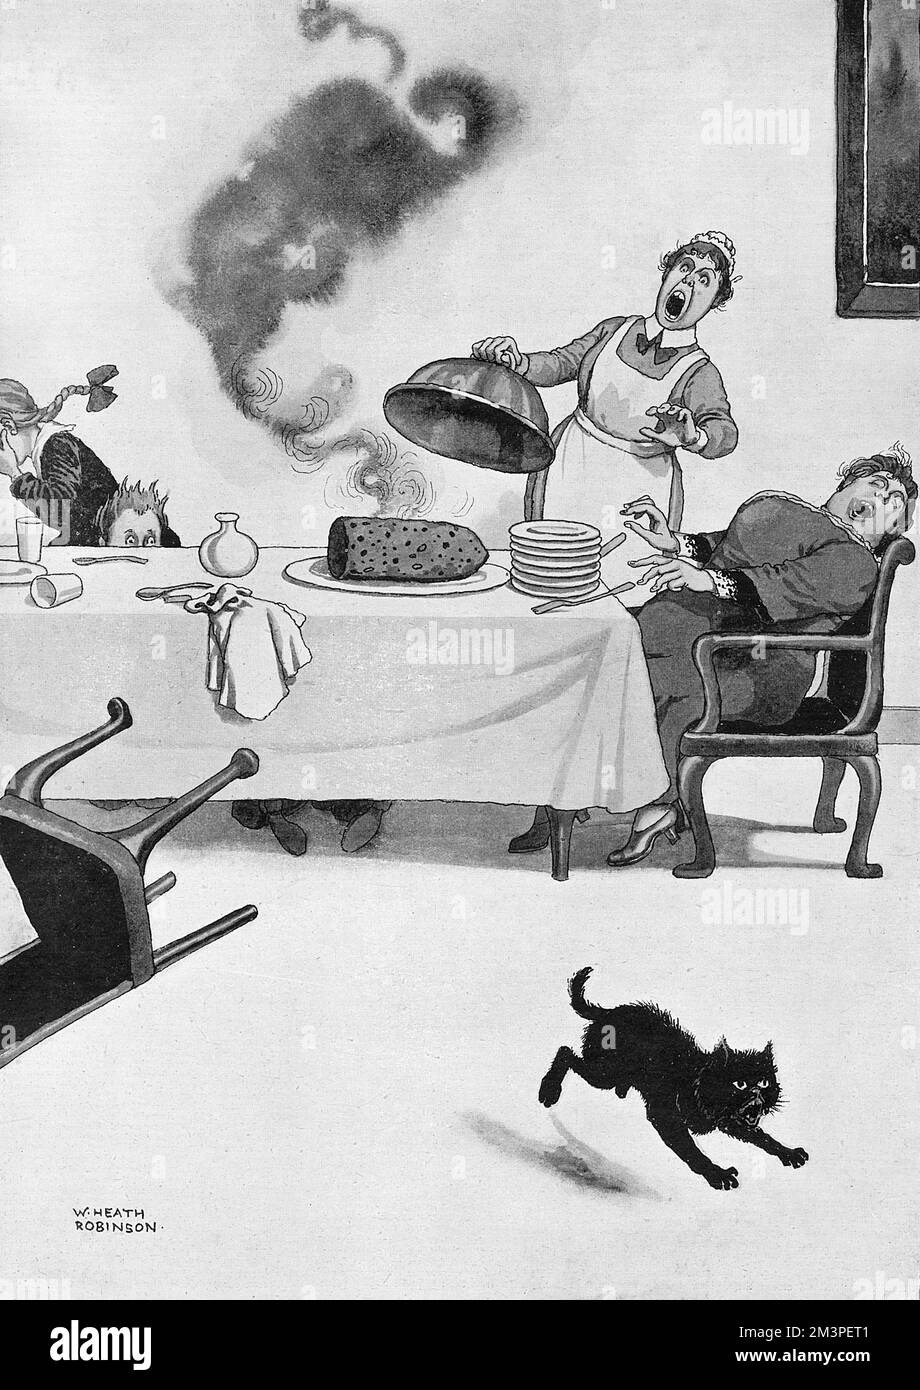 Distressing mistake of the cook recently released from a munition factory.    A family's cook absent-mindedly shapes the pudding for that day into a shell, much to the shock and panic of her employers.       Date: 1919 Stock Photo